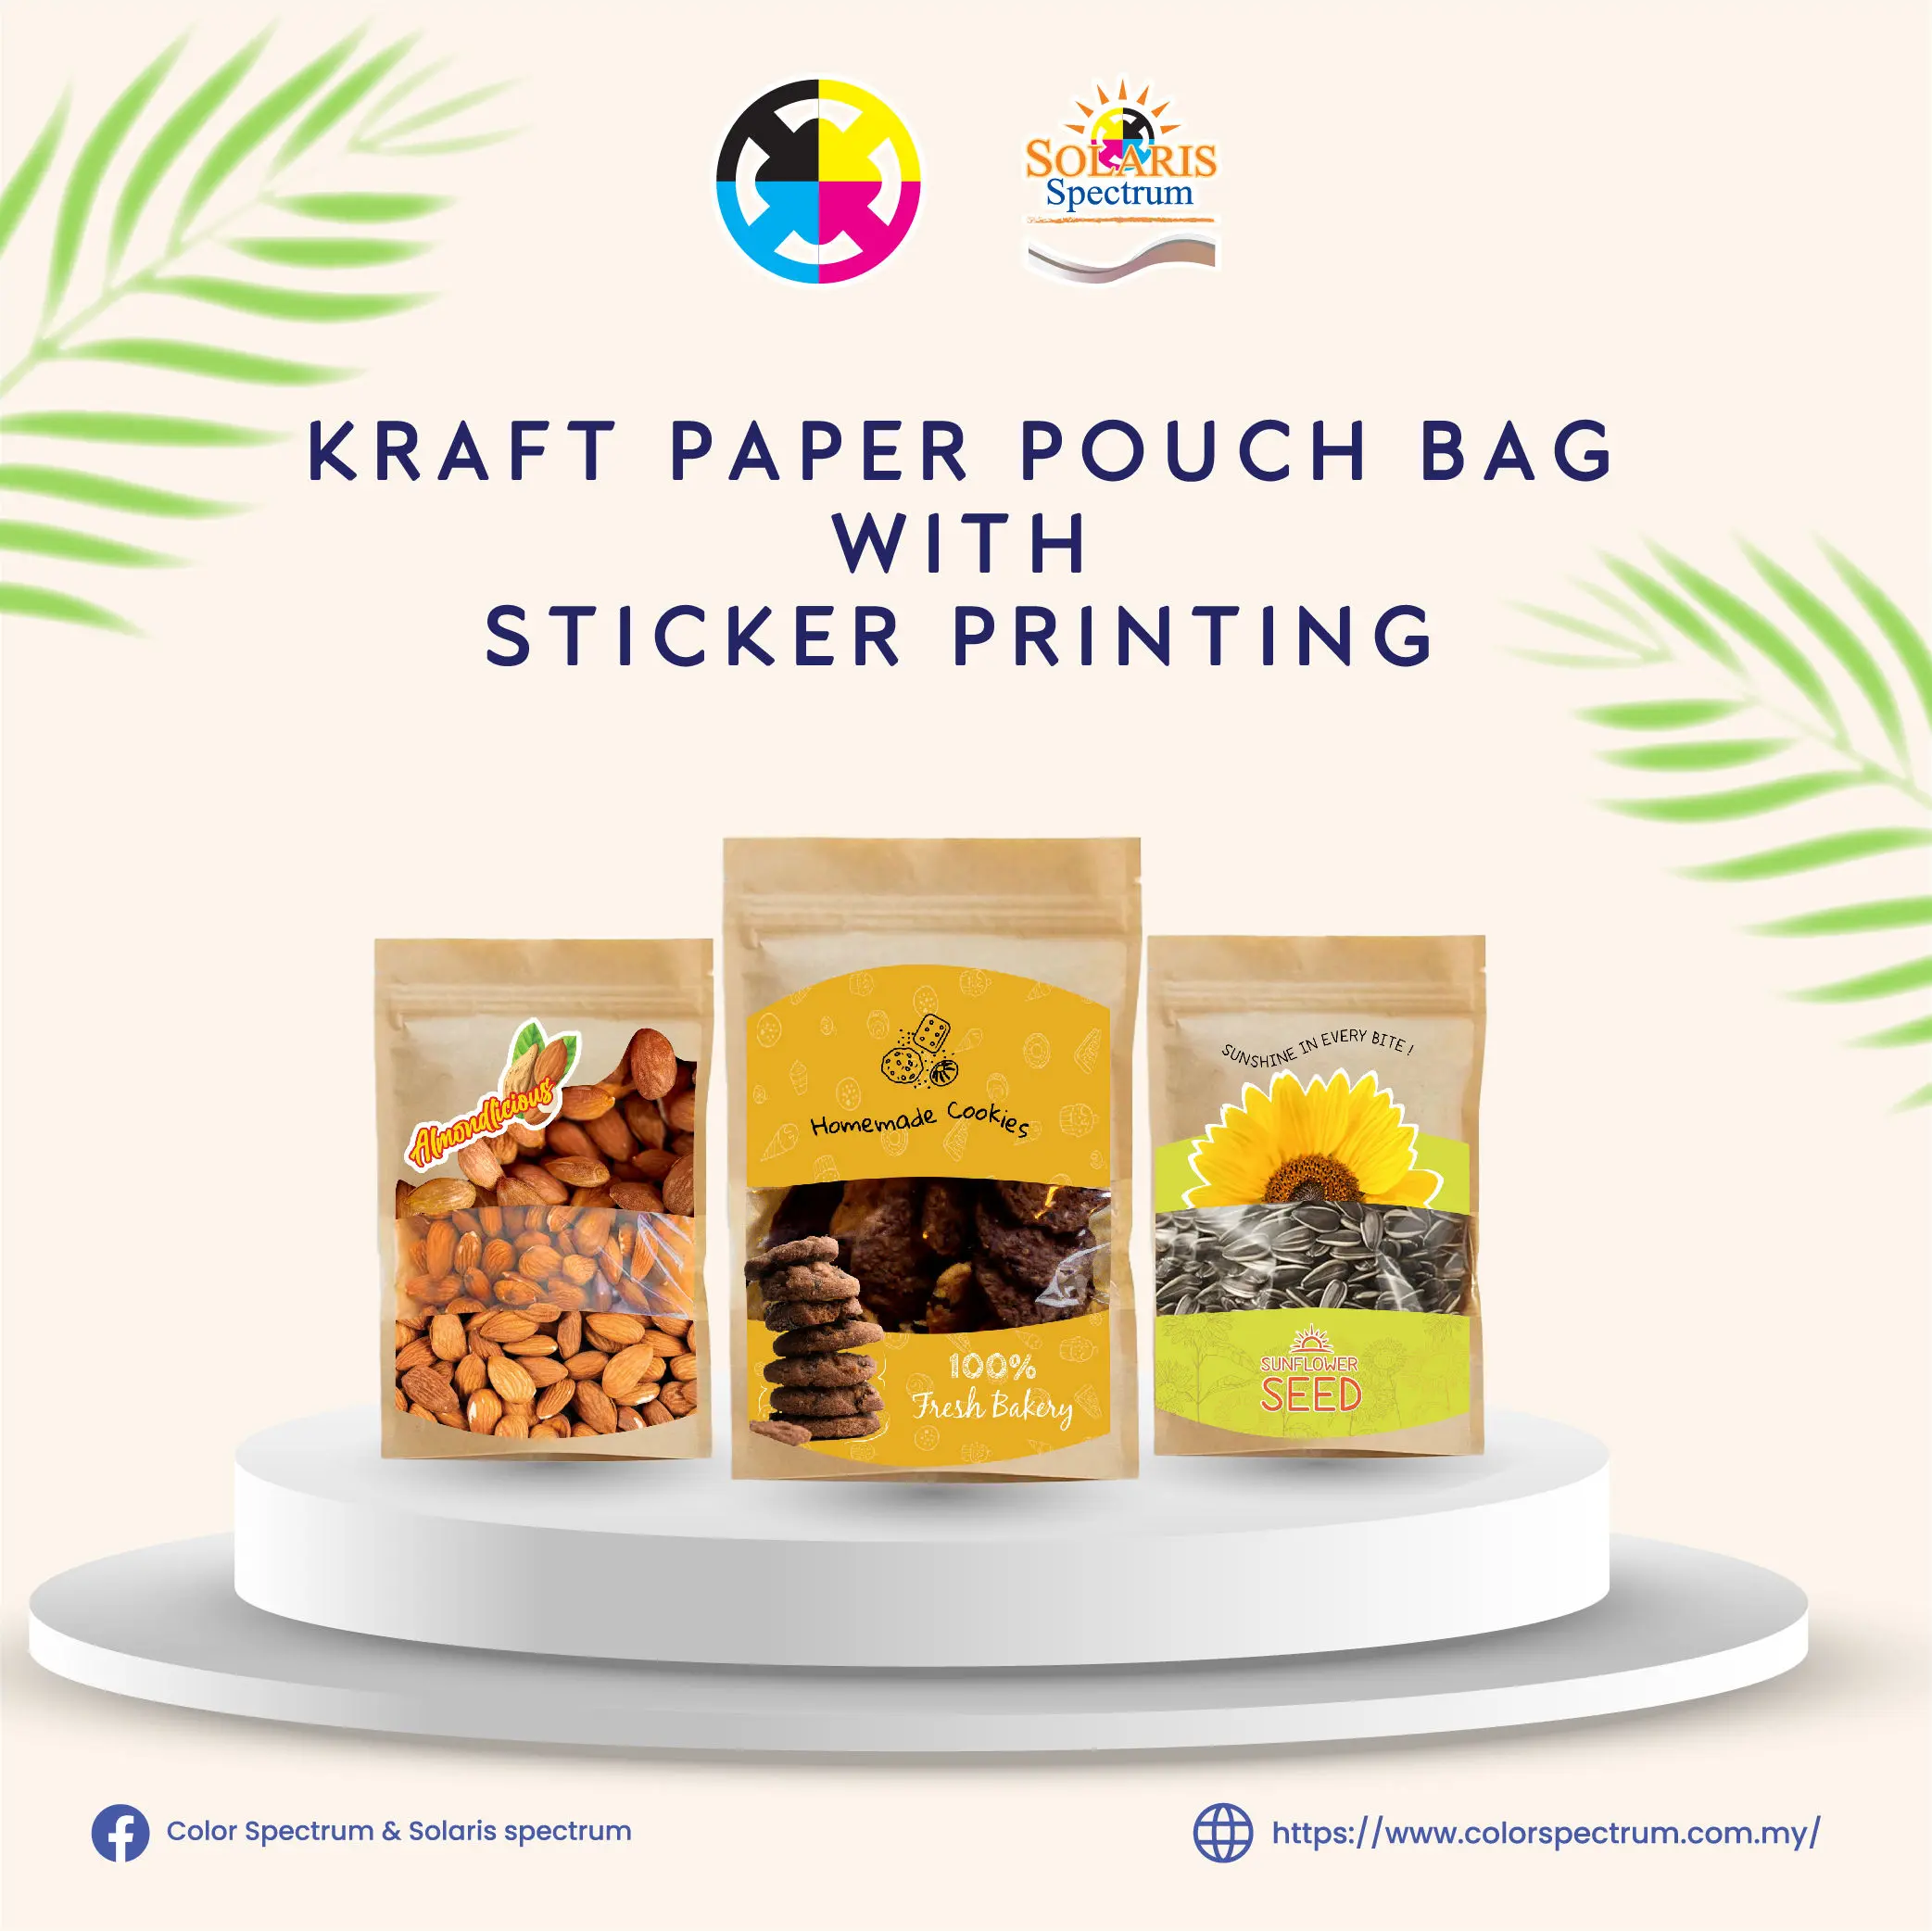 2) Kraft Paper Pouch Bag with Sticker Printing